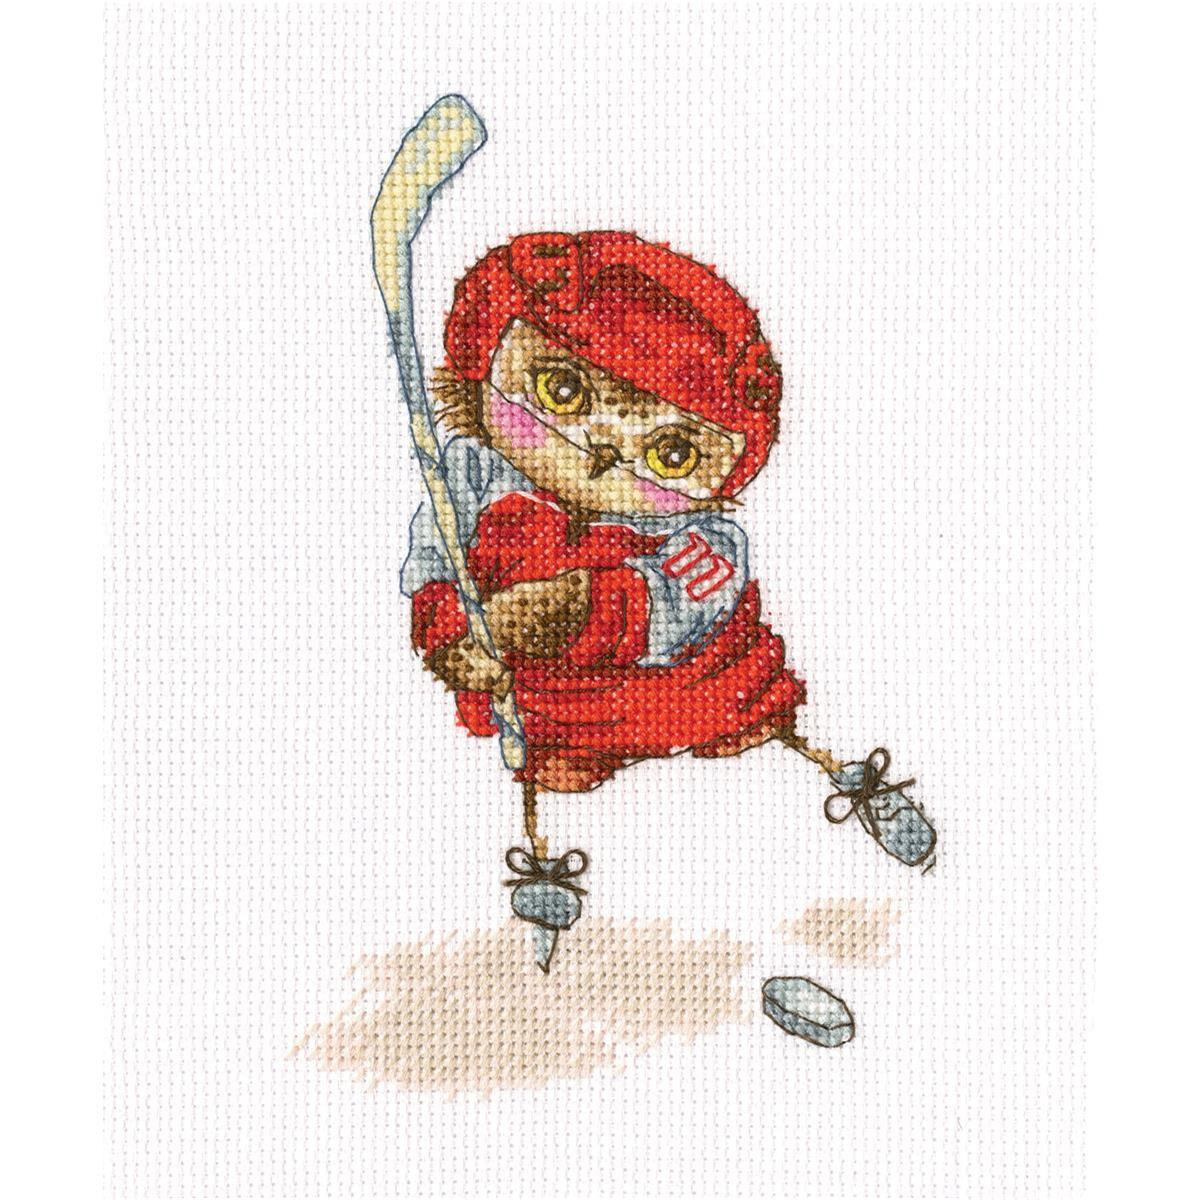 RTO counted Cross Stitch Kit "Shoot the puck!"...